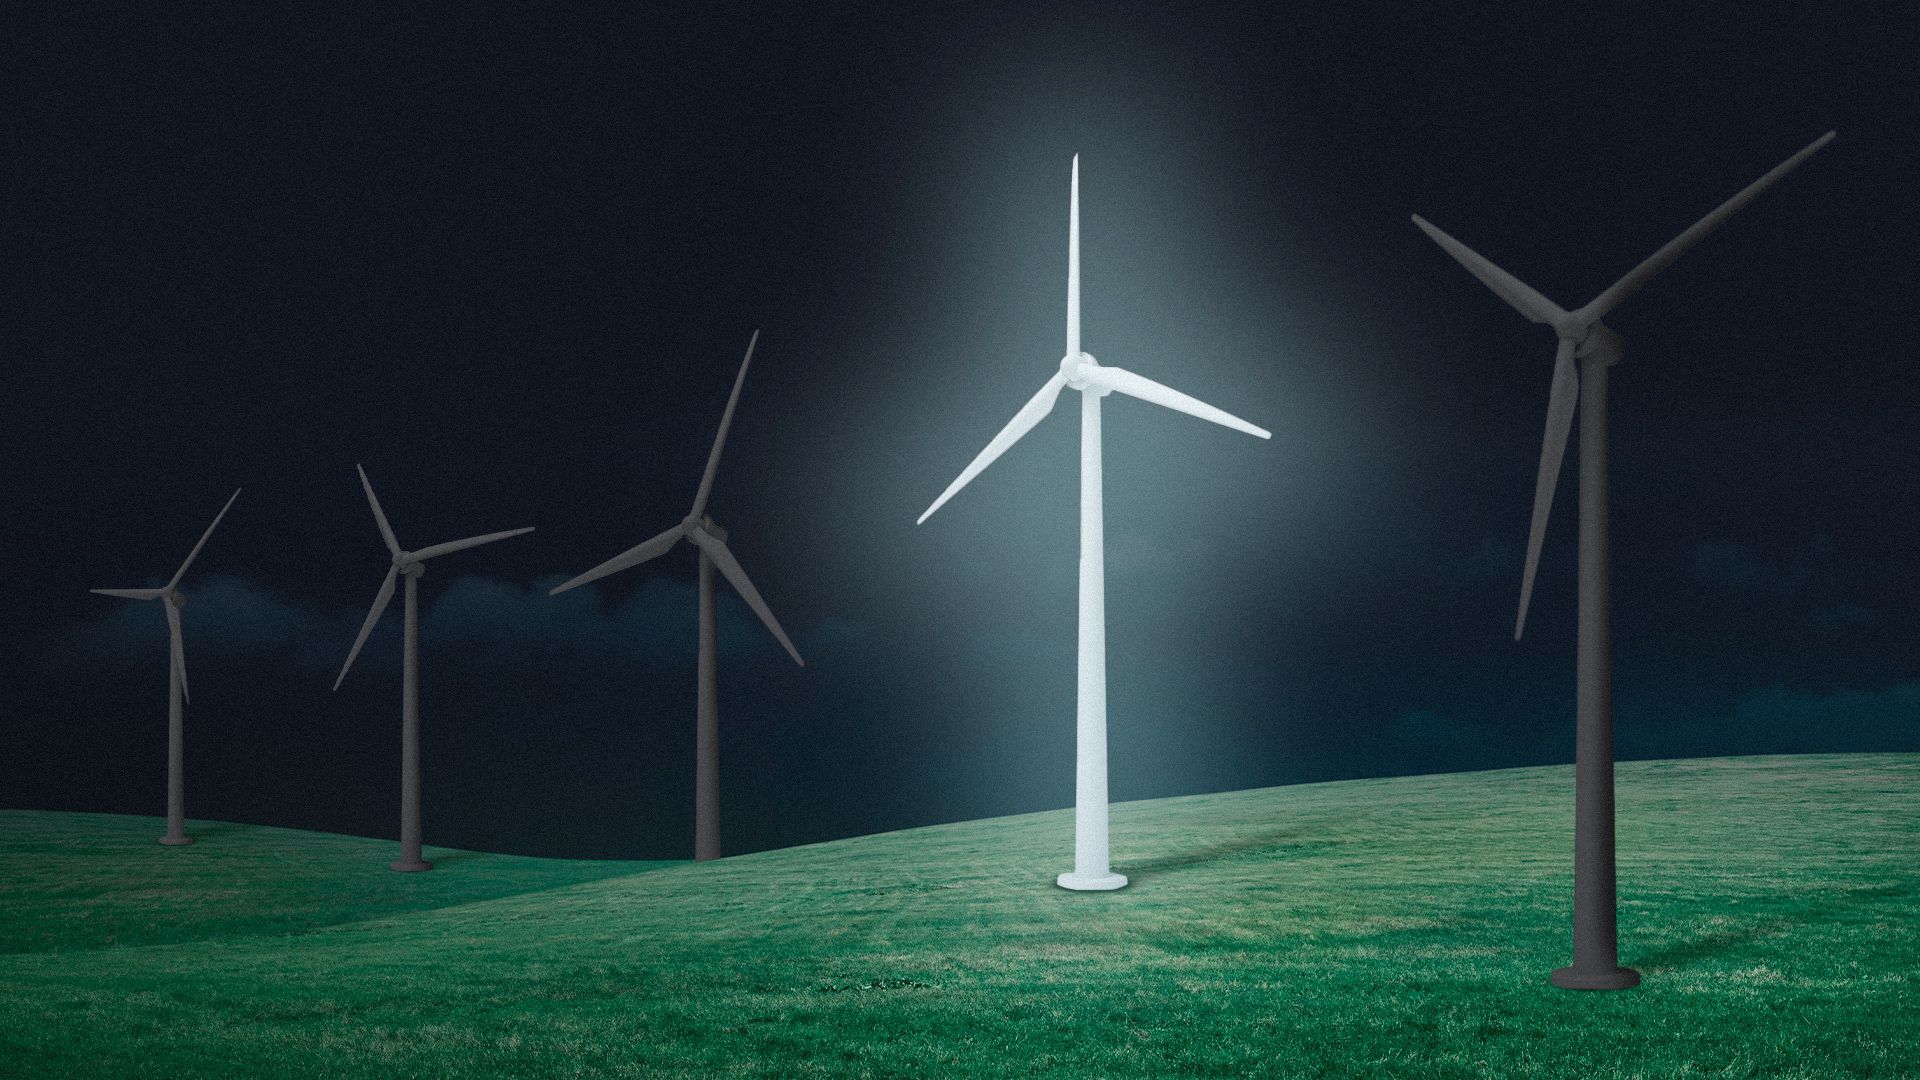 Illustration of a line of wind turbines in a field at night, with one glowing brightly.